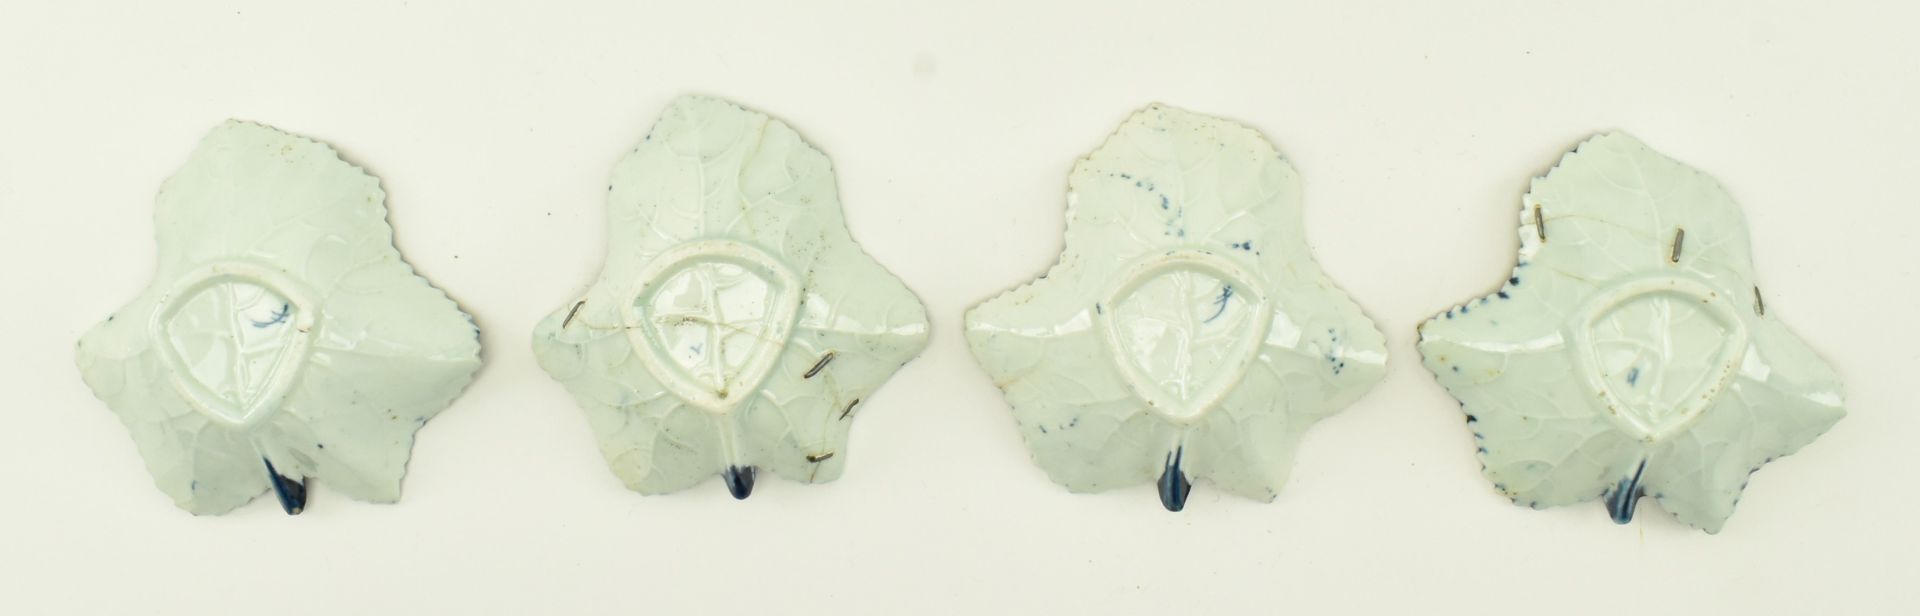 FOUR 18TH CENTURY WORCESTER BLUE & WHITE LEAF PICKLE DISHES - Image 7 of 9